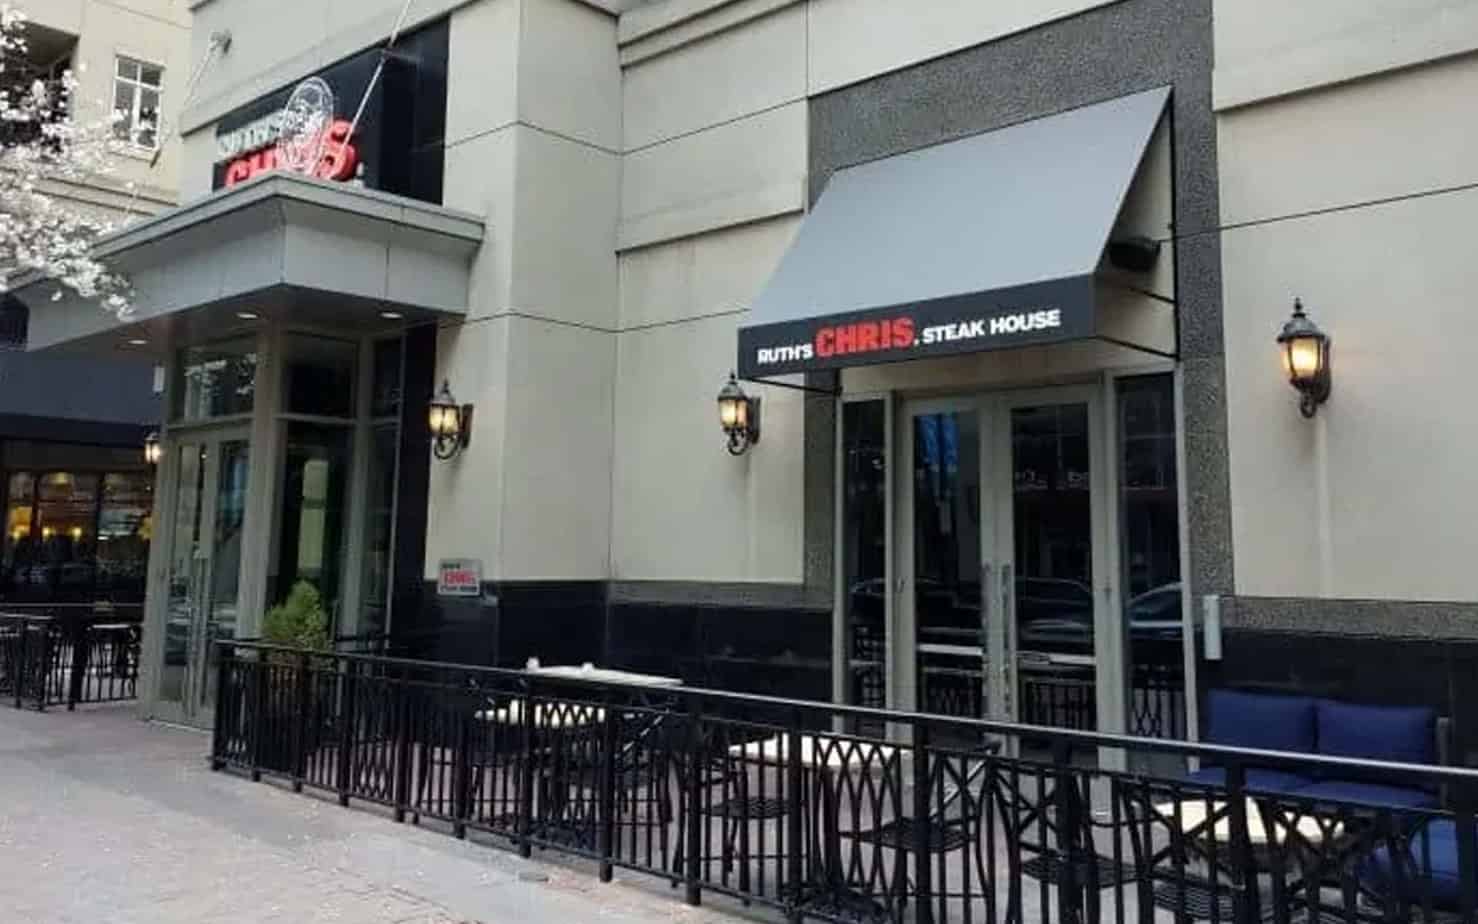 Ruth's Chris to Repay it's Previously Accepted Small Business Loan(s)